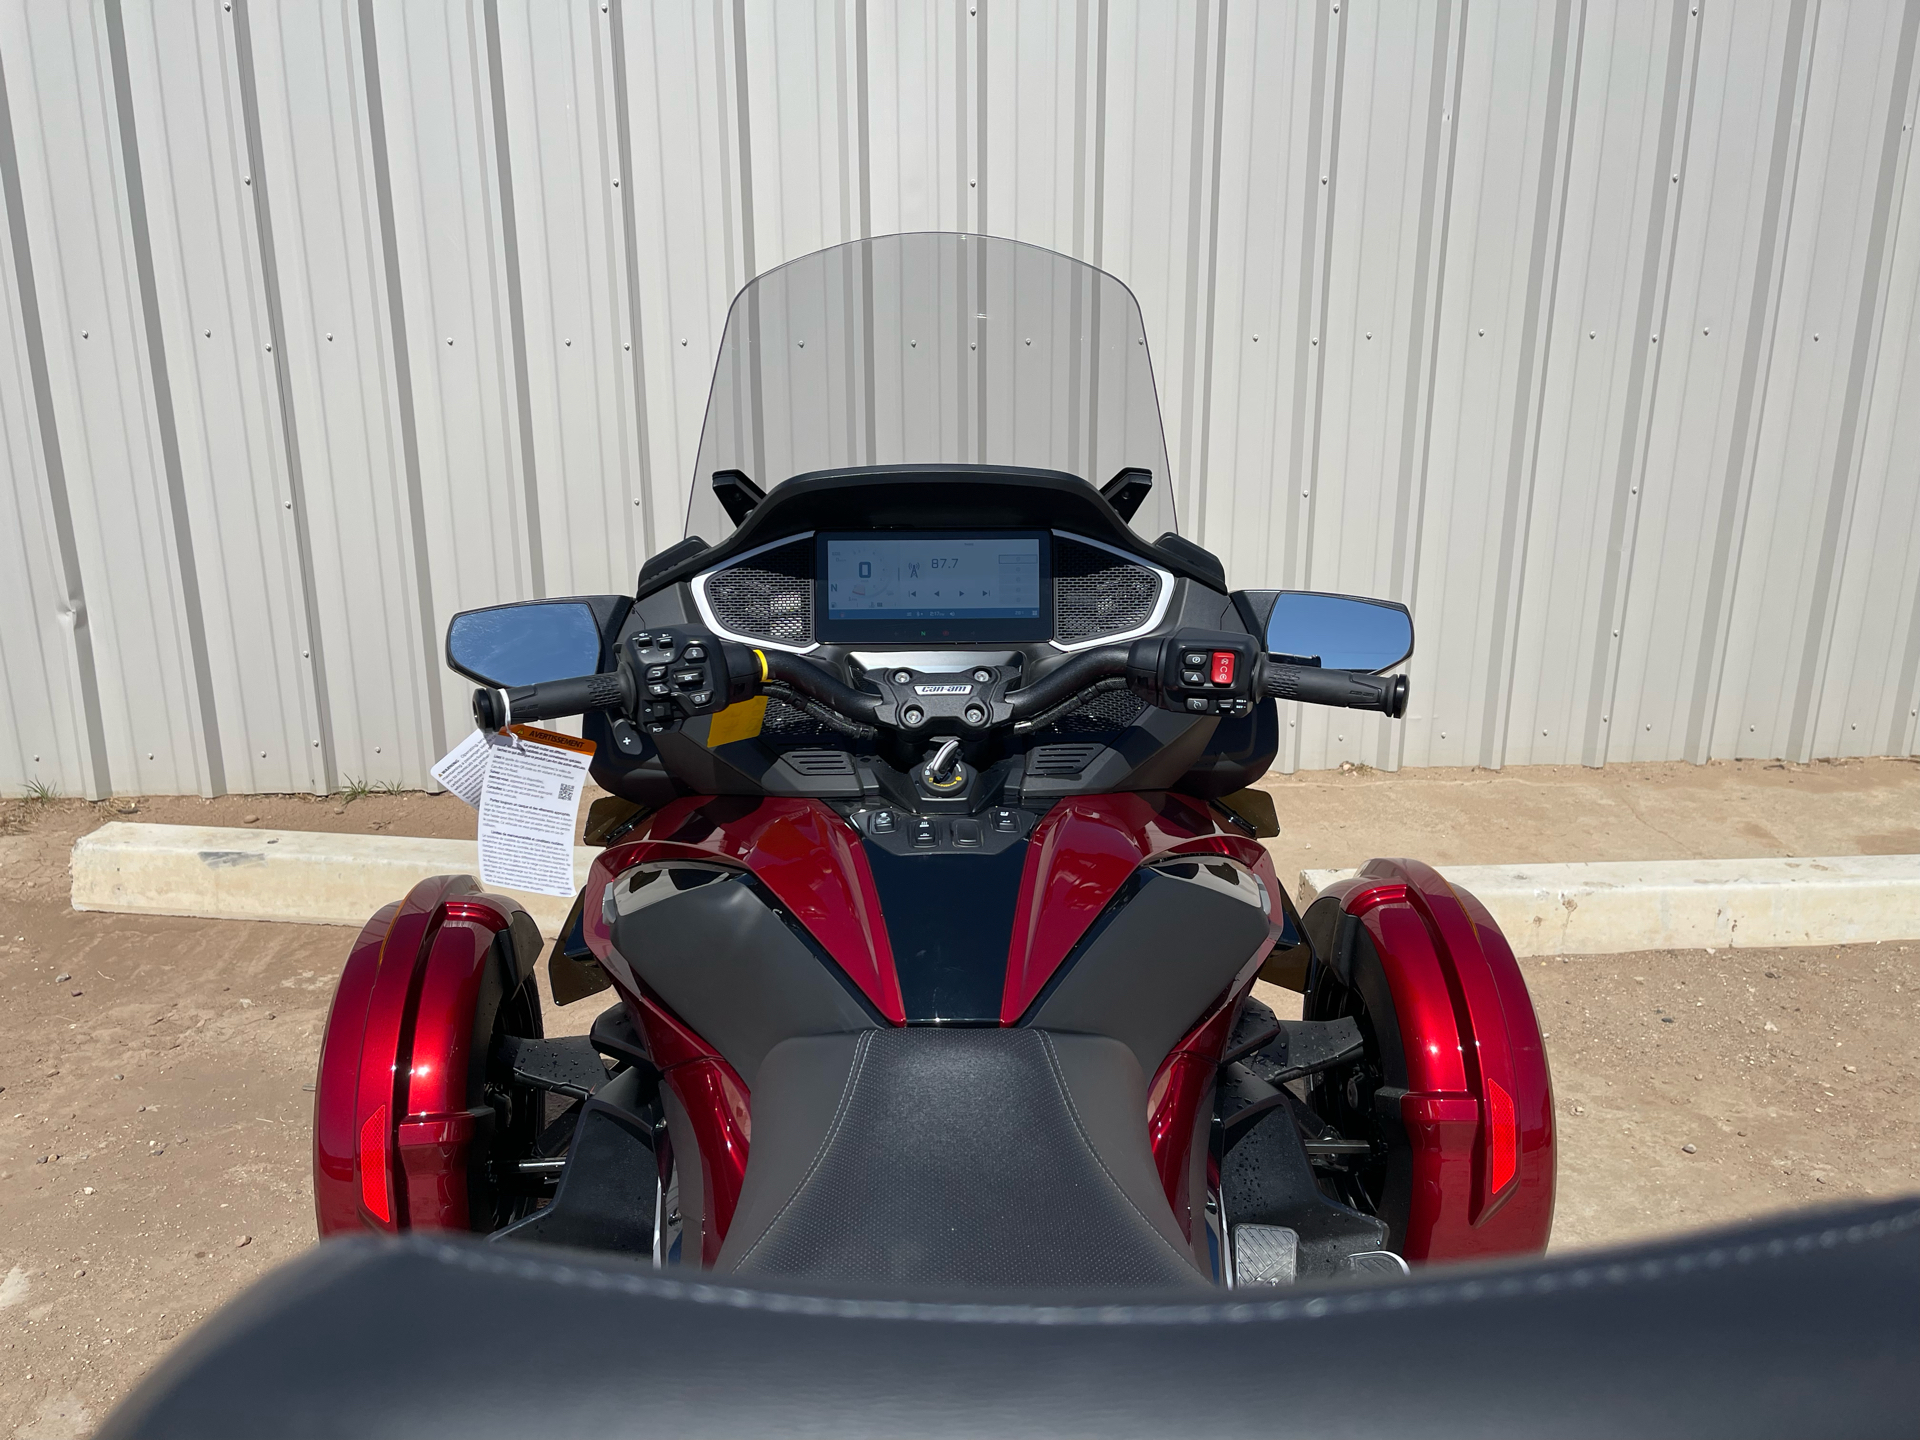 2024 Can-Am Spyder RT Limited in Amarillo, Texas - Photo 5